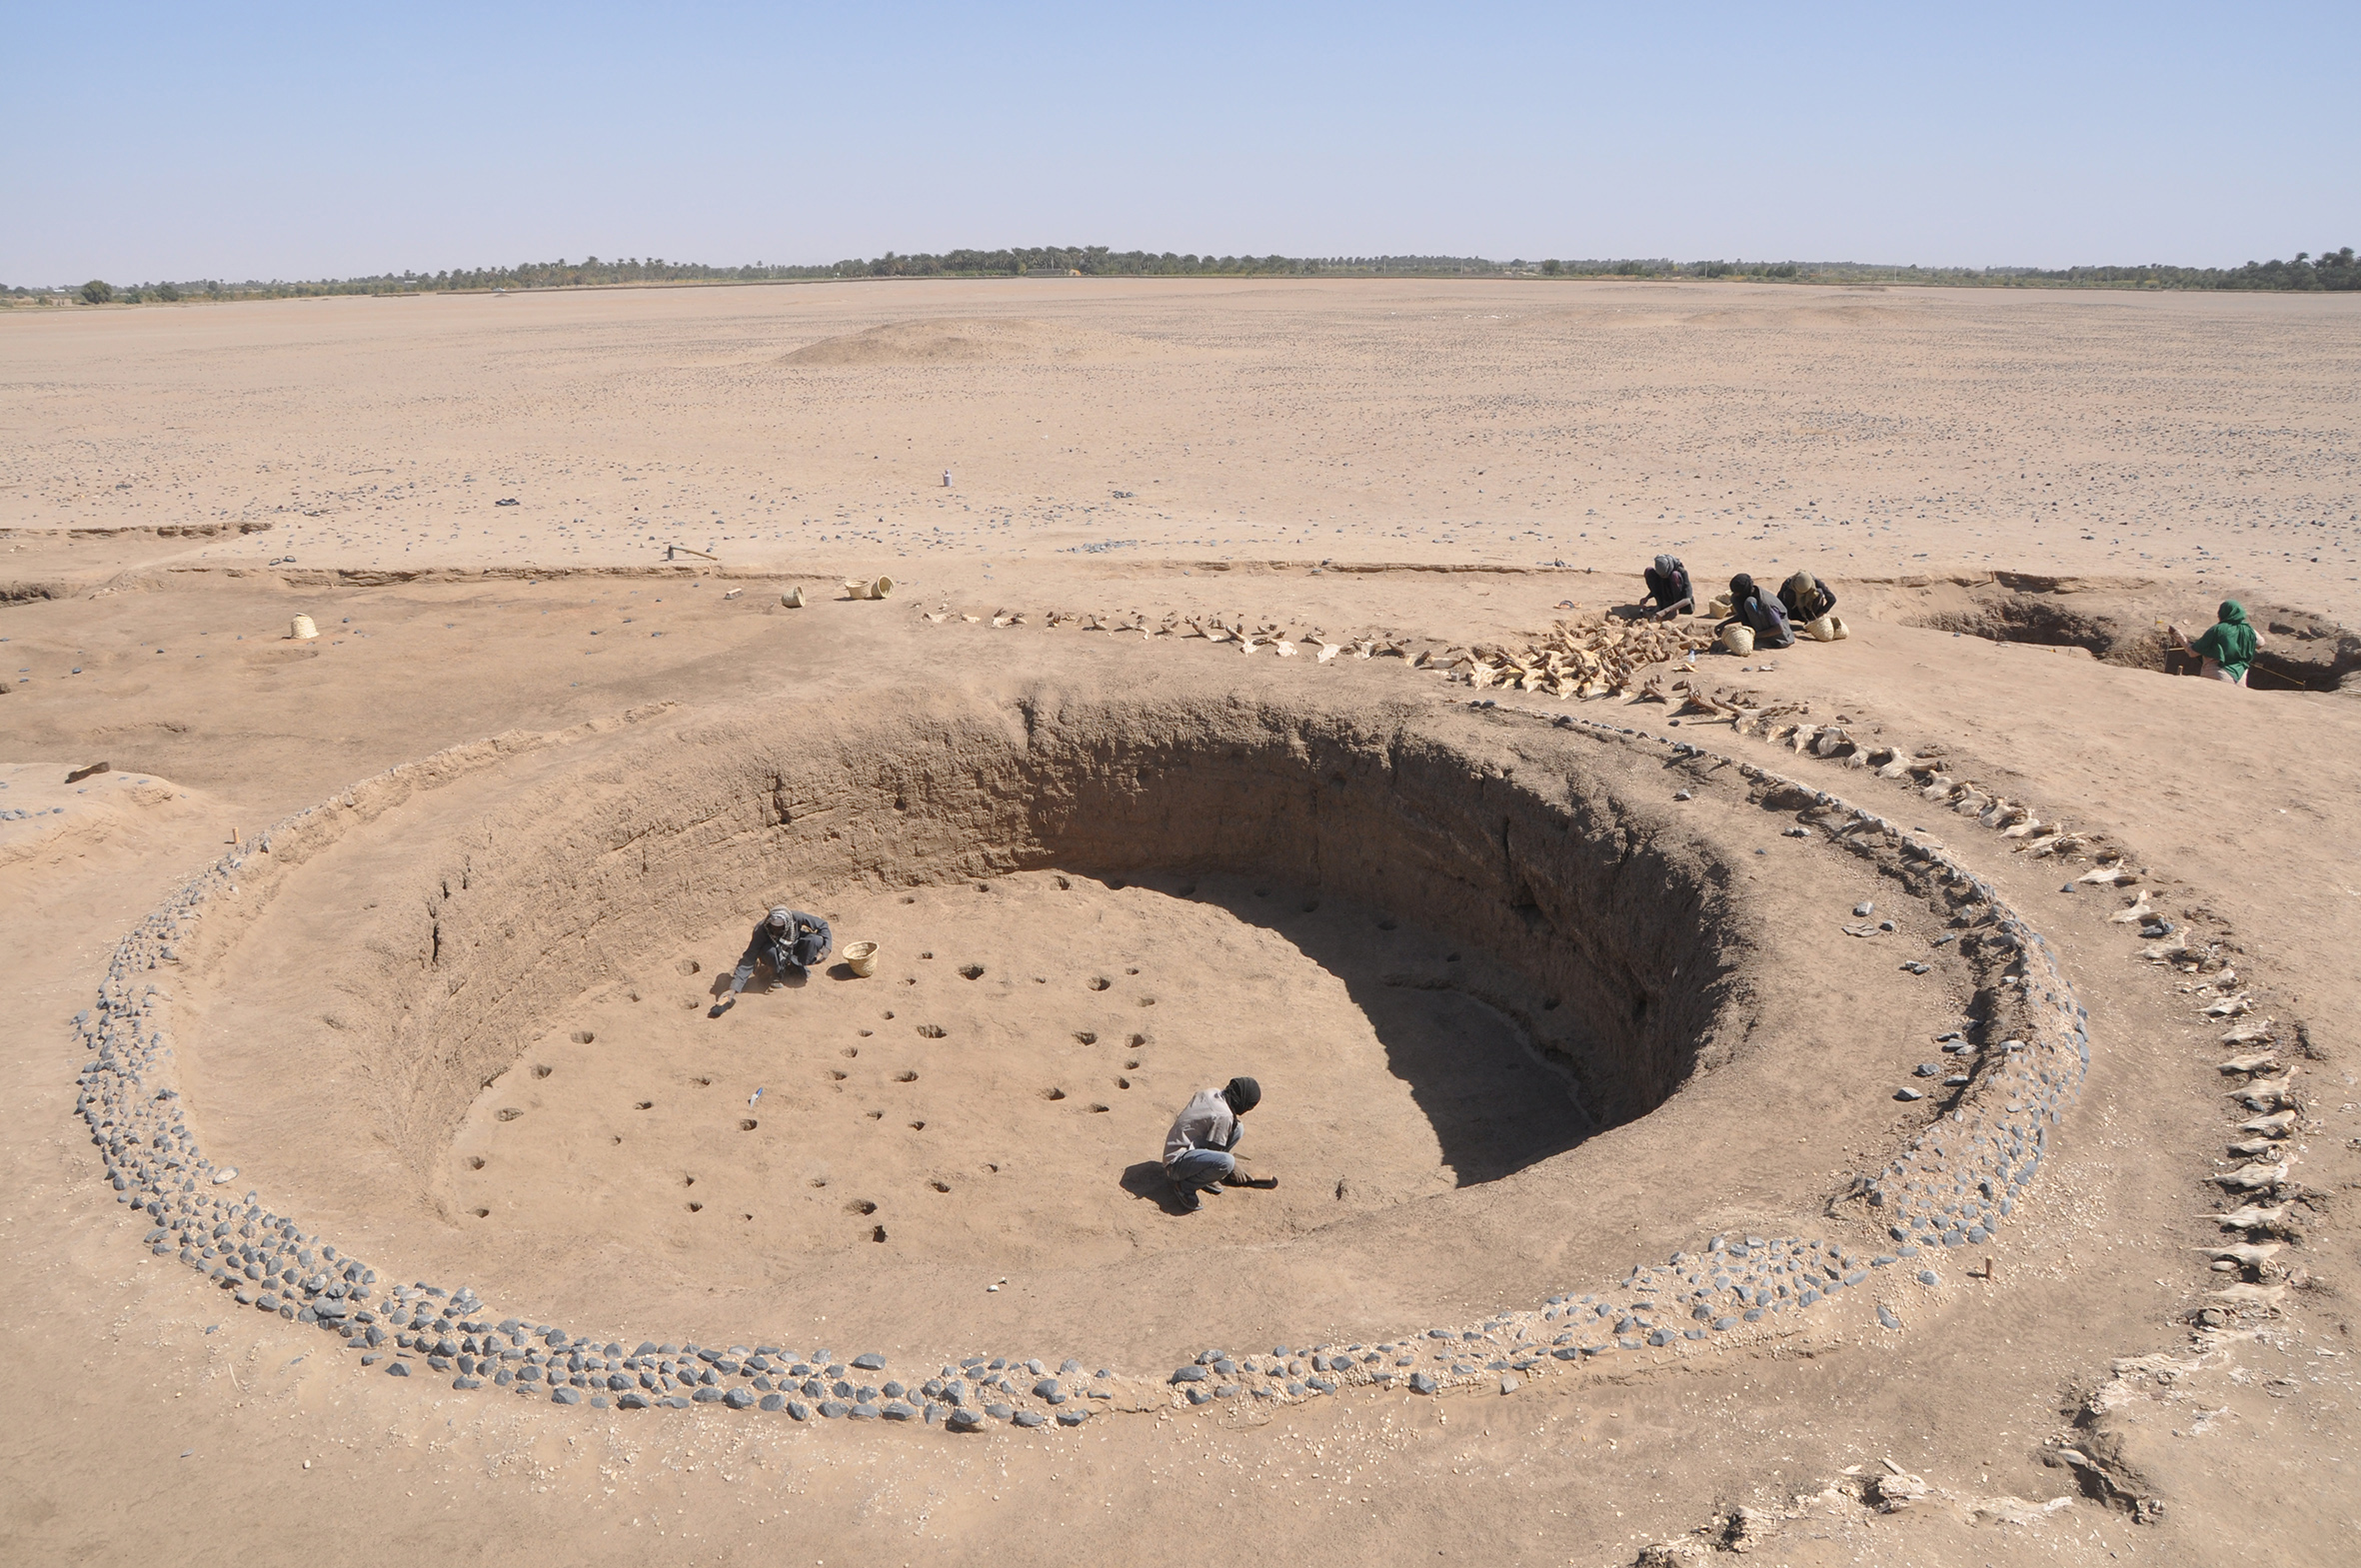 View of the first Kerma royal tomb (Kerma moyen I, 2050-1950 BC). One can see the edge of the burial tumulus made of earth and stones, the post holes of a wooden architectural structure inside the burial pit and more than 1400 bucrania to the south of the tomb. The diameter of the burial pit is about 10 metres.